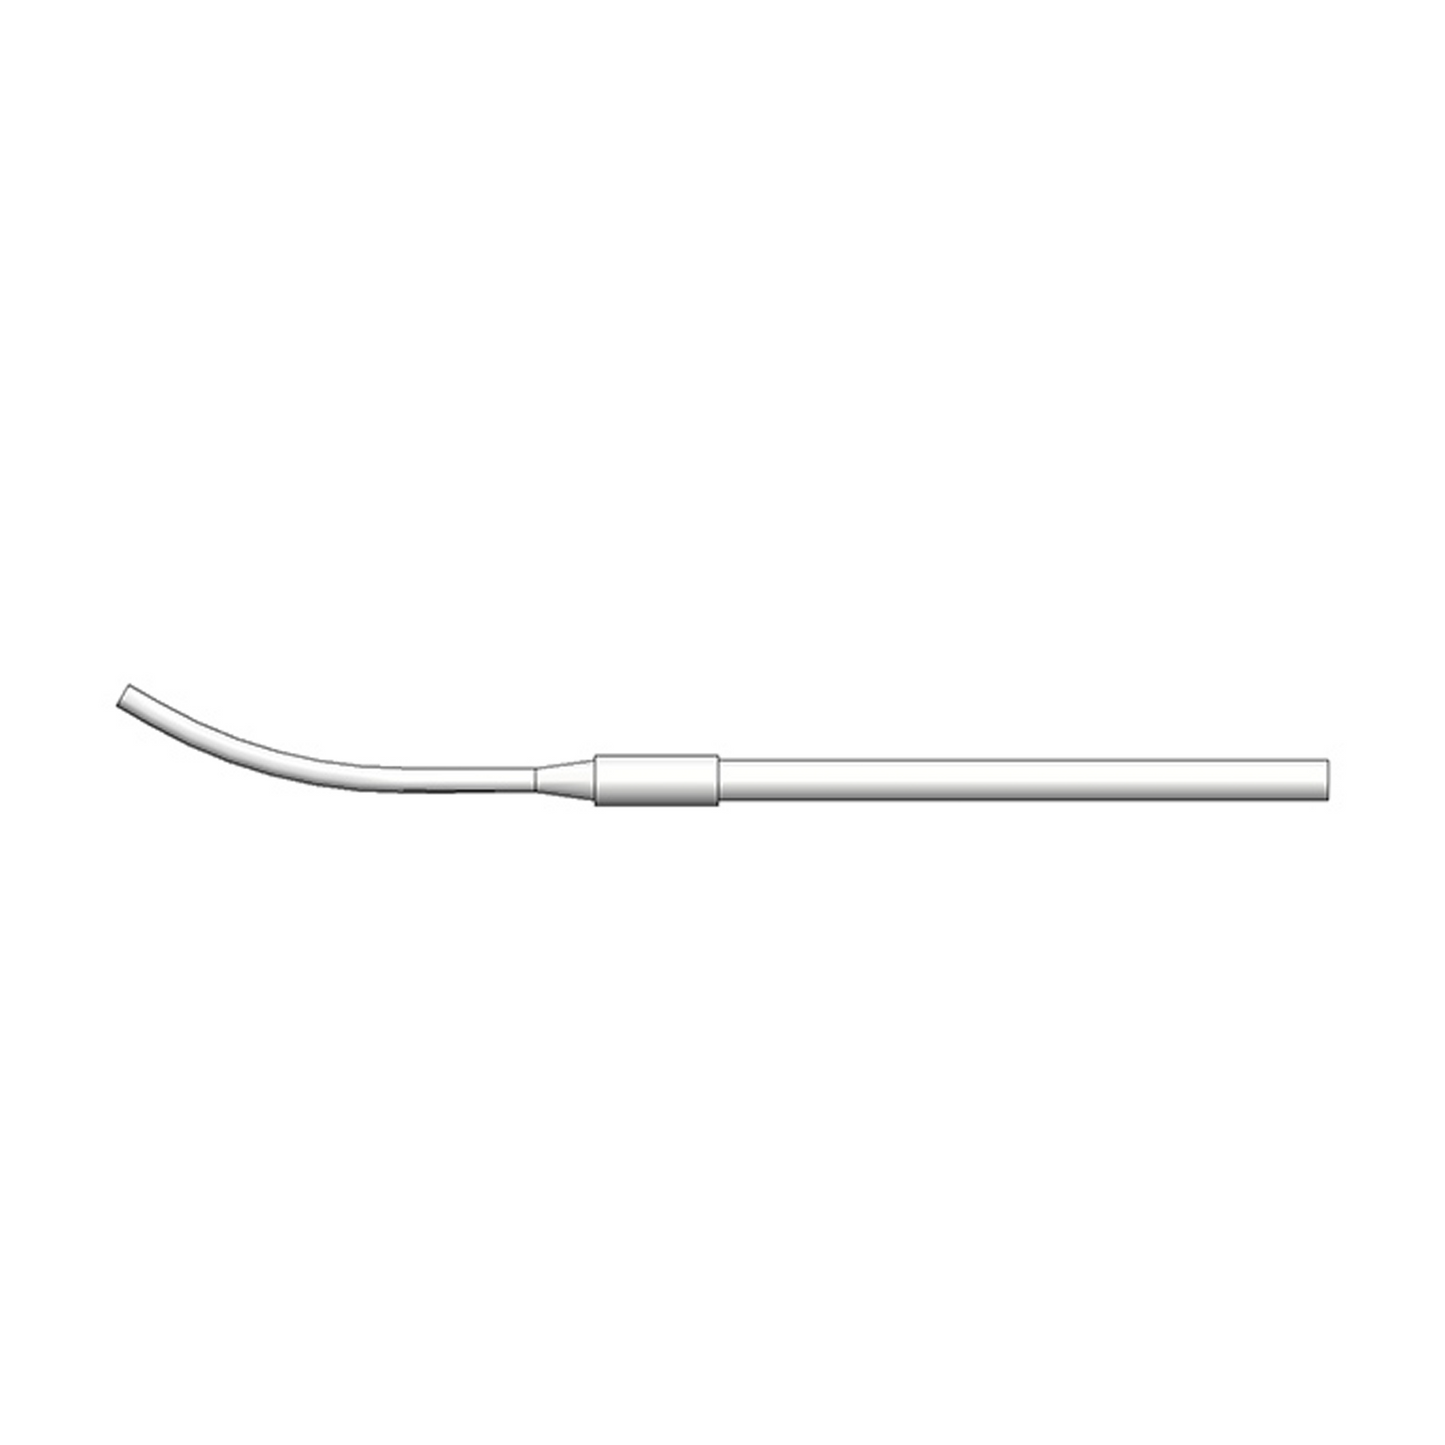 Hakko Products_ B5269 Feed pipe assembly 0.8MM_ Soldering Accessories_ Hakko Products